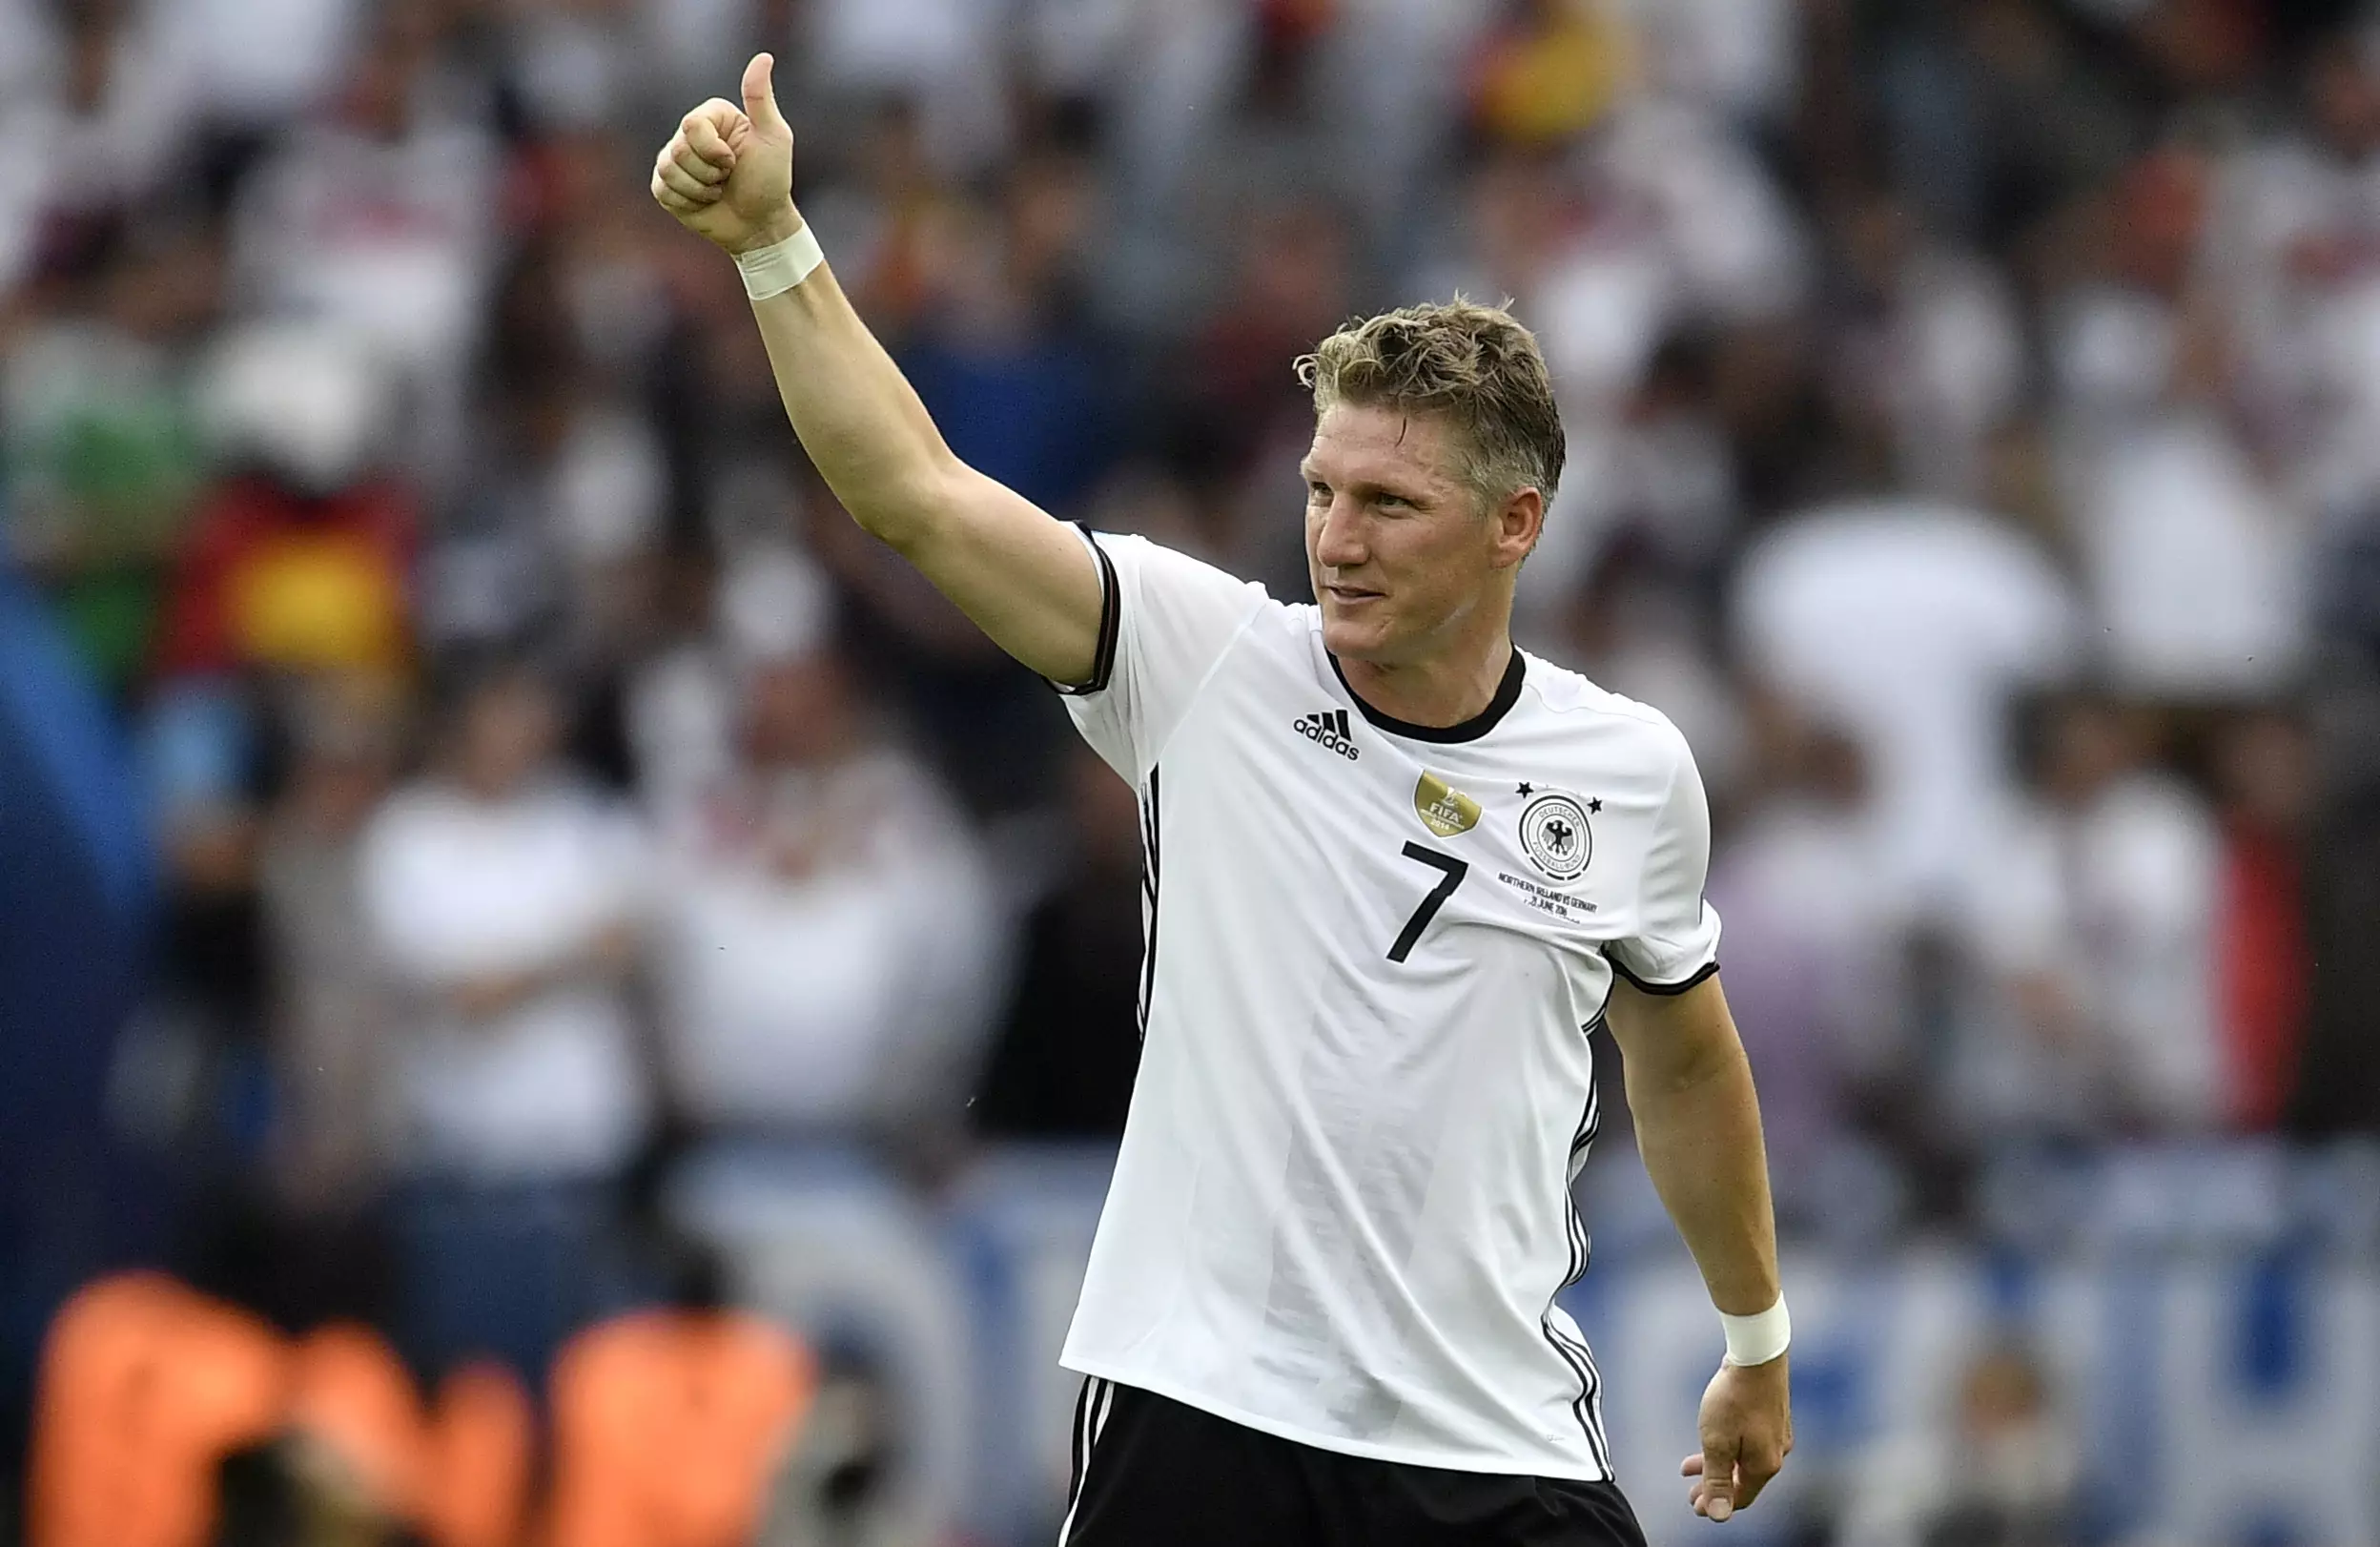 A Letter From Bastian Schweinsteiger Stopped A Former Referee From Committing Suicide